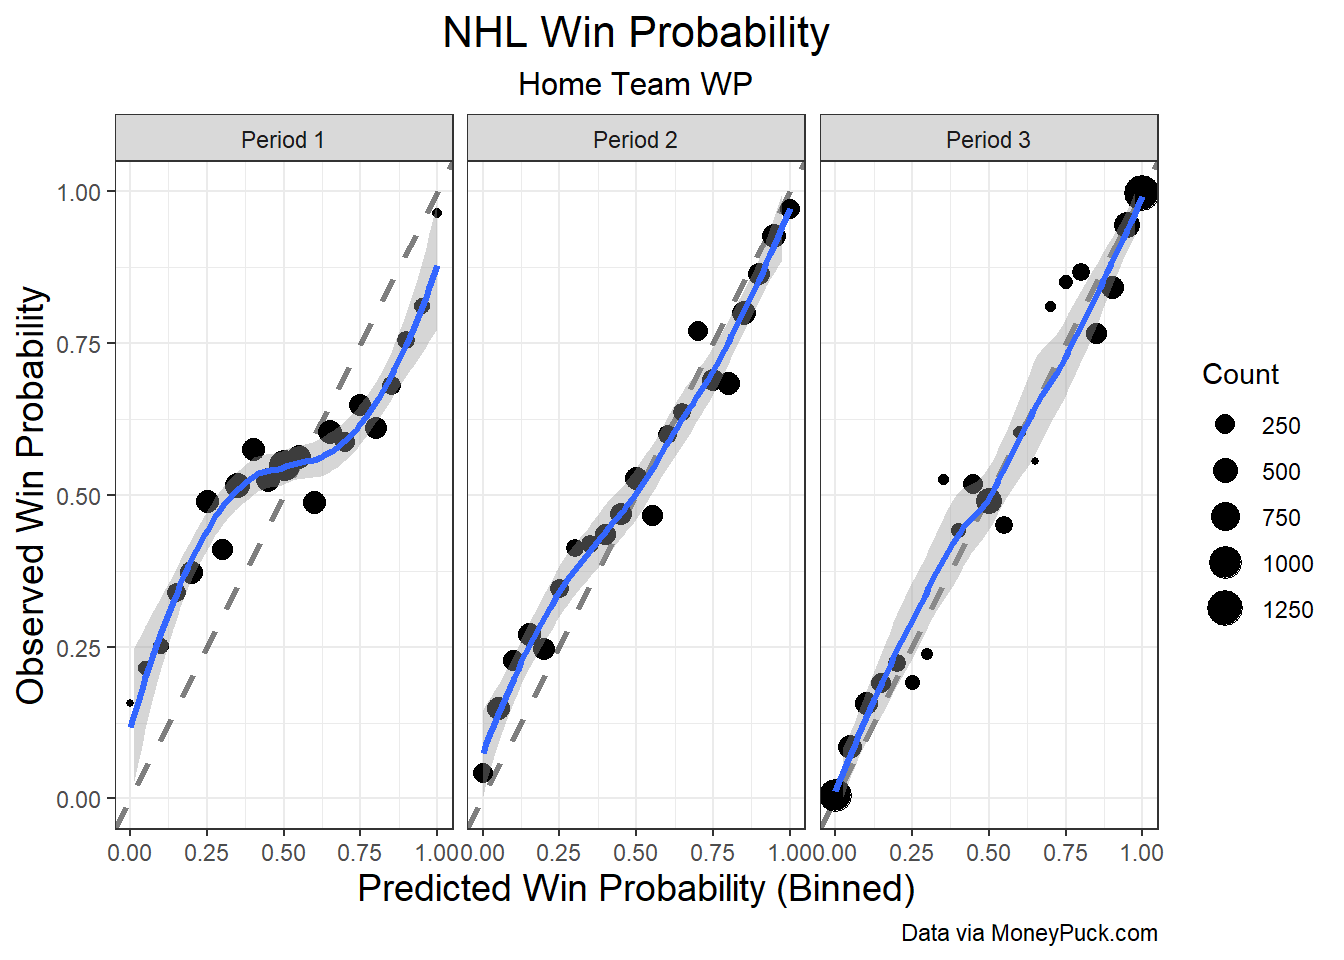 Judging Win Probability Models - inpredictable